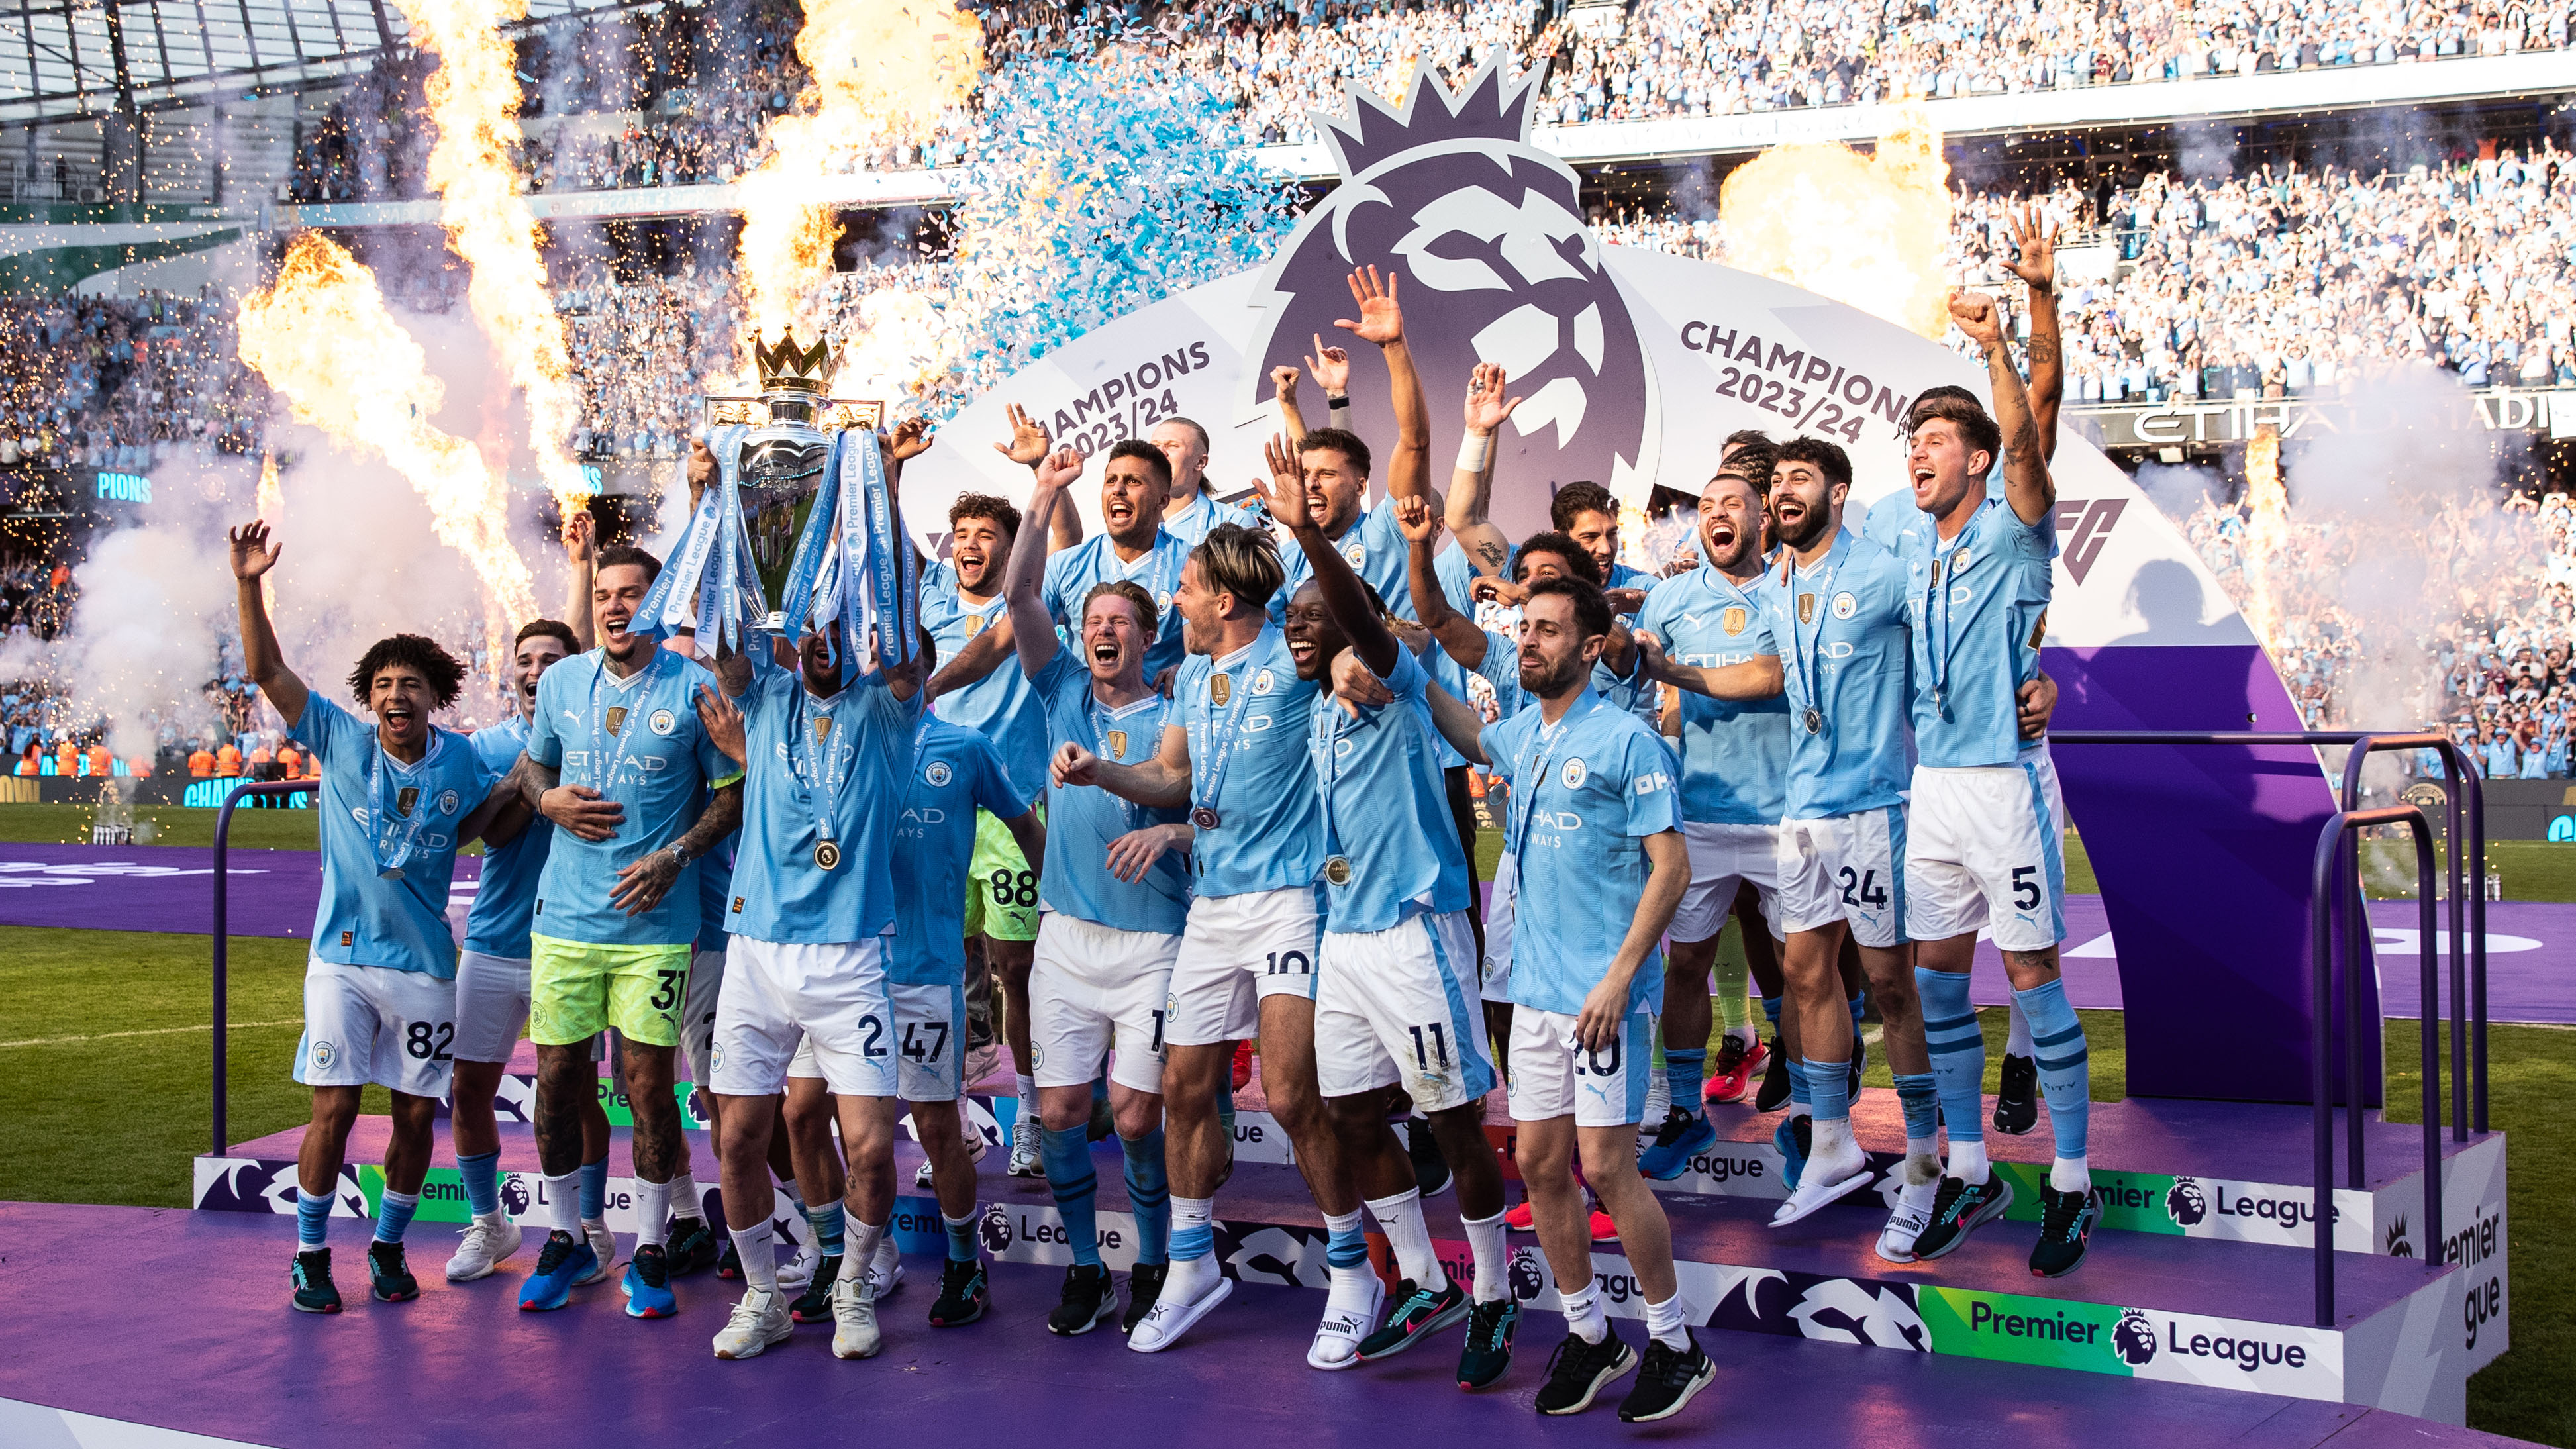 Man City wins record fourth-straight Premier League title after 3-1
win over West Ham